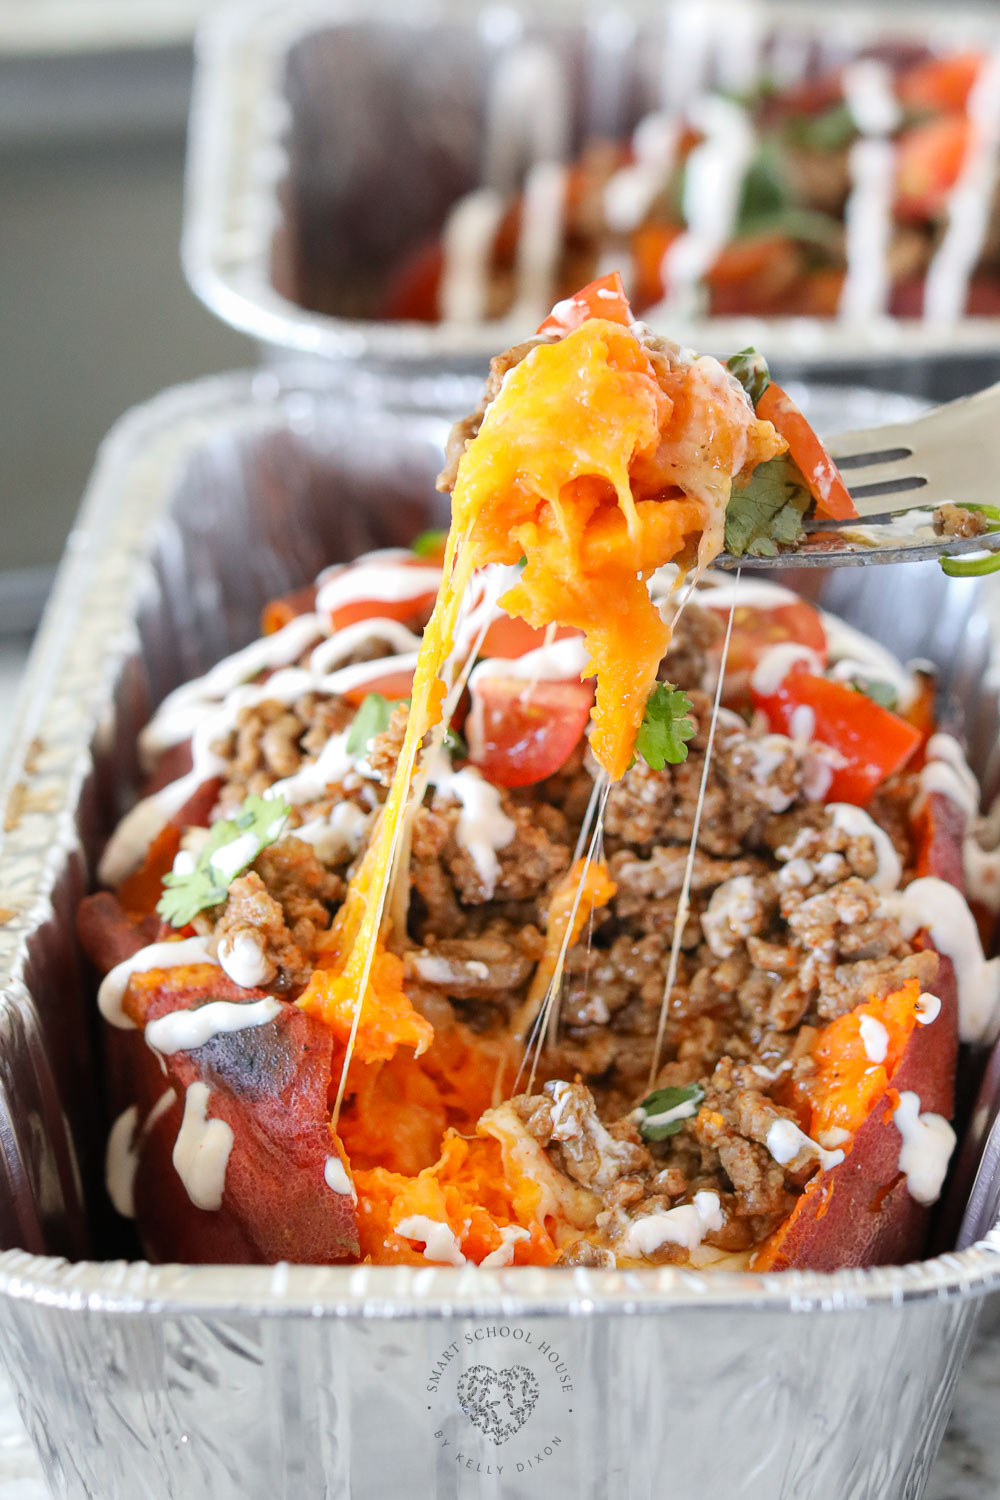 Taco Stuffed Potatoes are nutritious sweet potatoes OR everyone's favorite russet potatoes overflowing with seasoned meat and classic taco toppings!